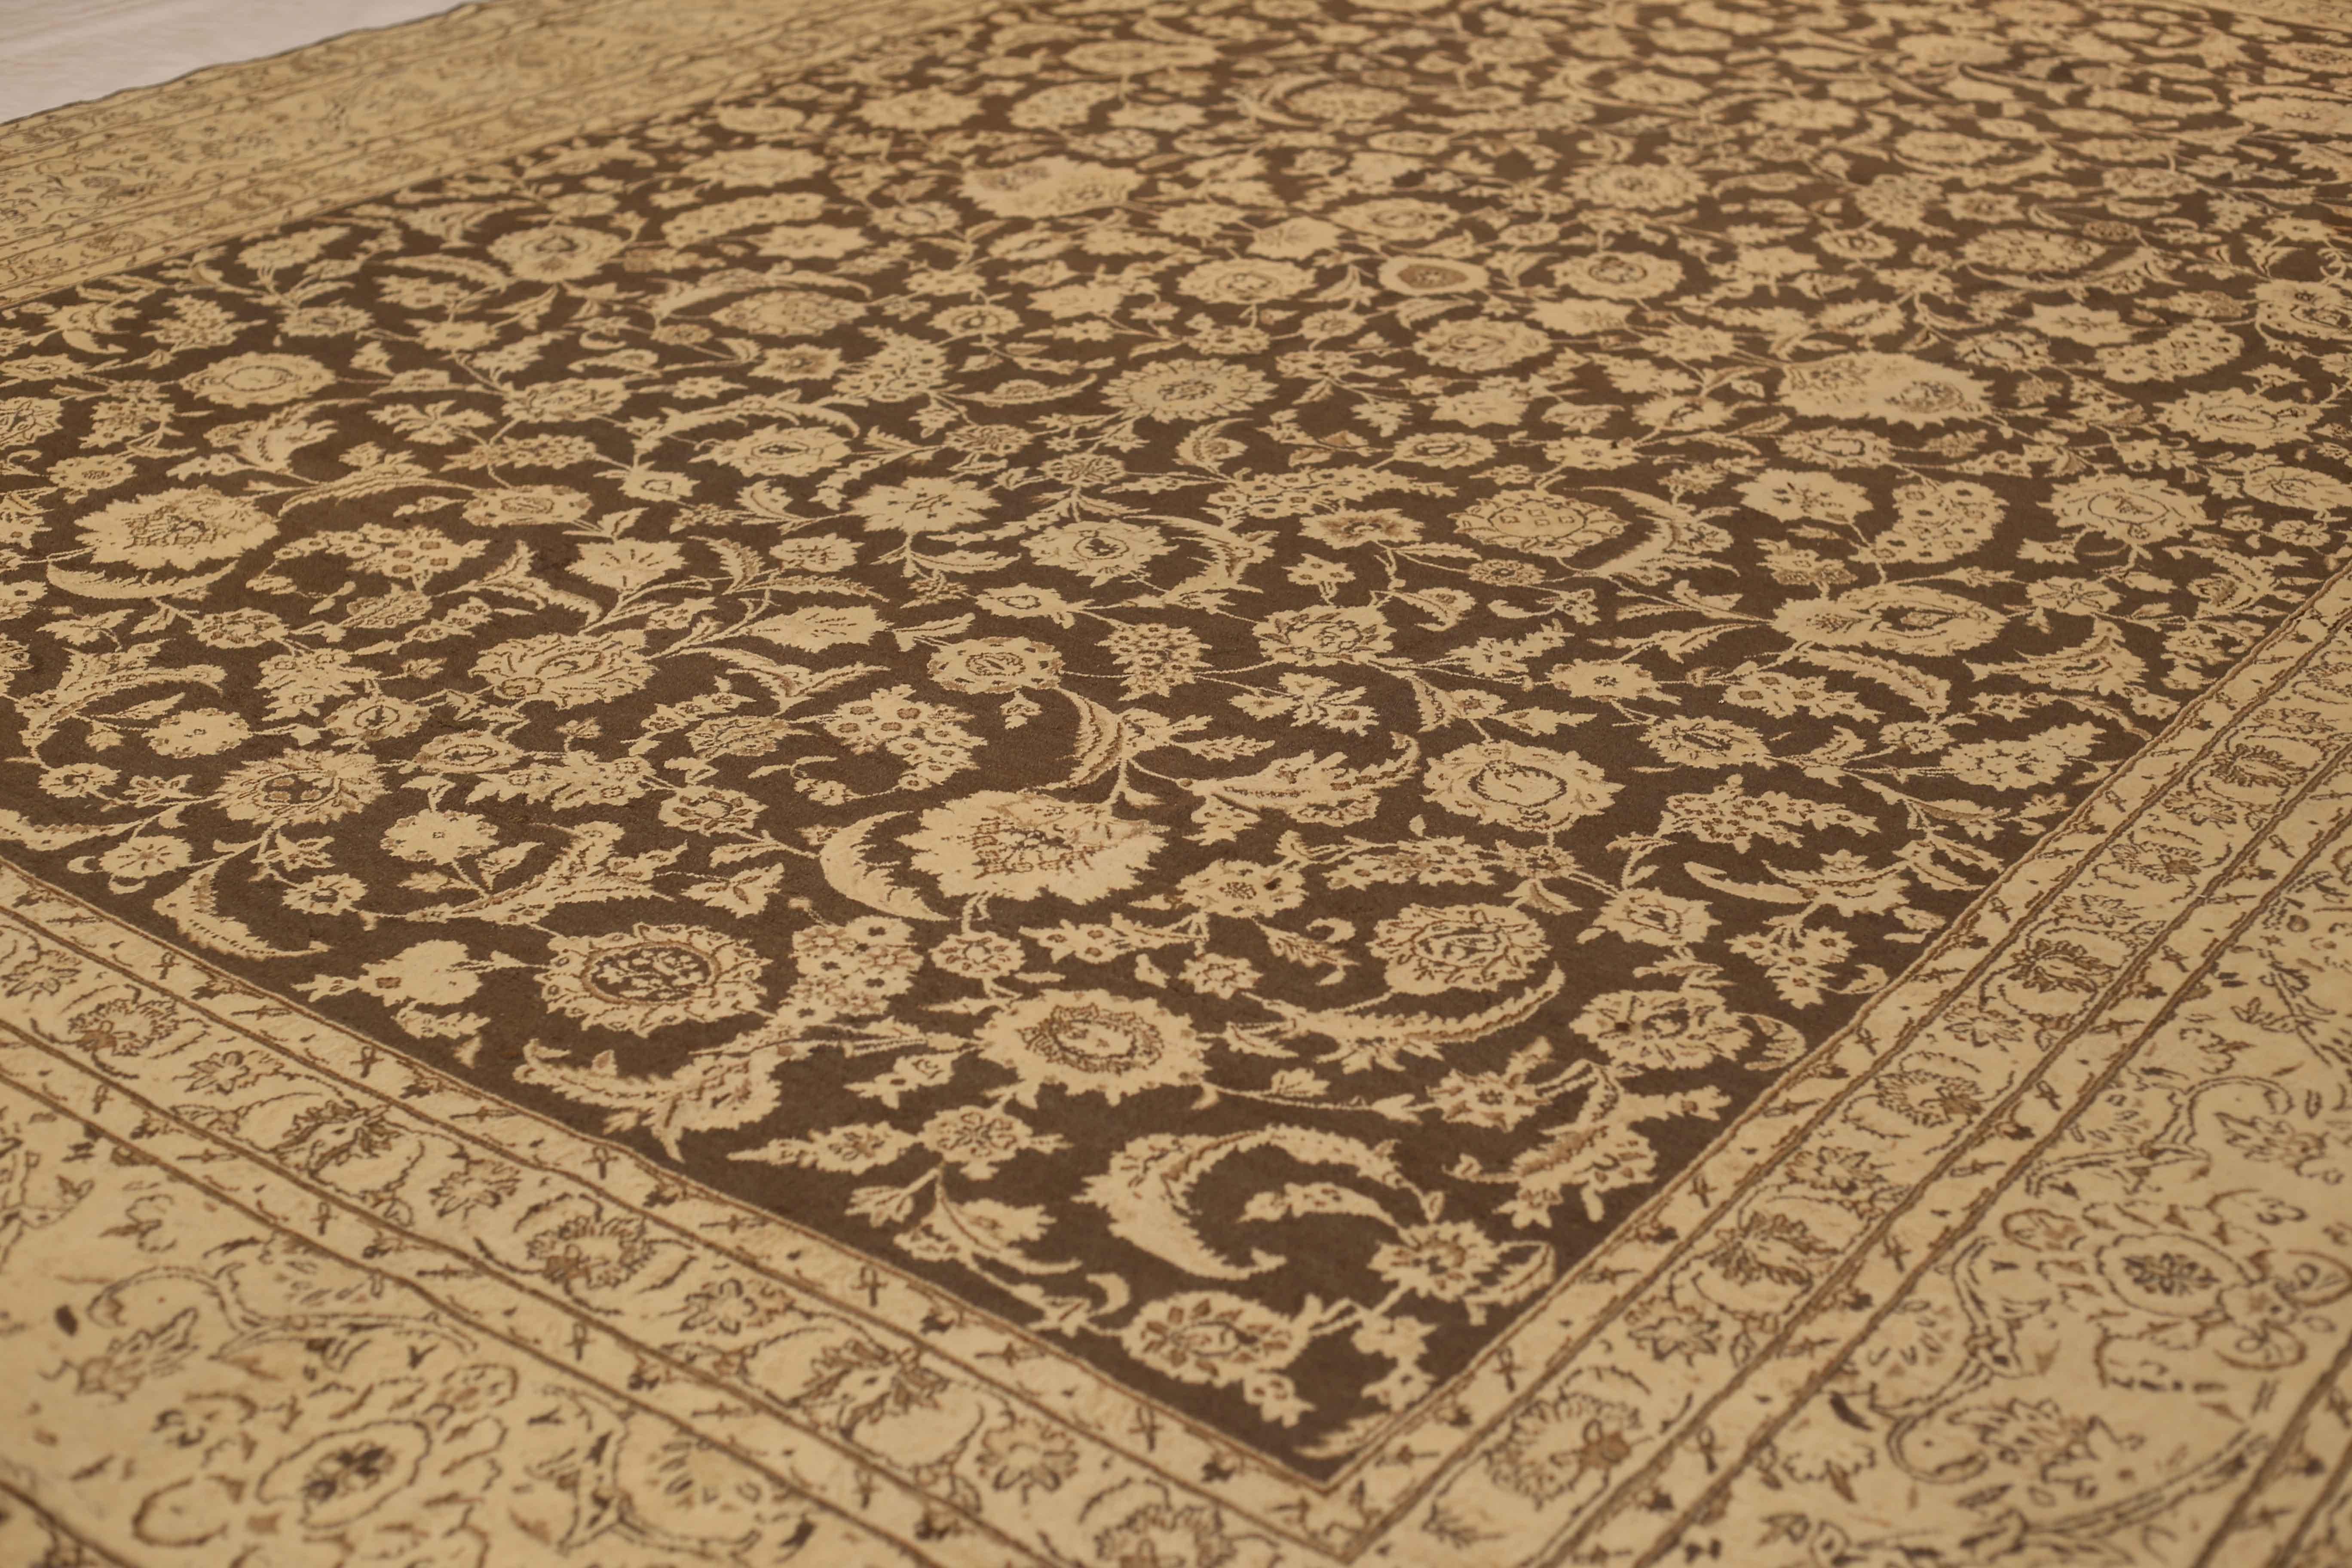 Handmade from the highest quality of wool and colored with rich organic dyes from vegetable and plant extracts. It’s an antique Persian rug created in the 1930s using a design pattern favored by weavers in Kerman province. It features ornately woven